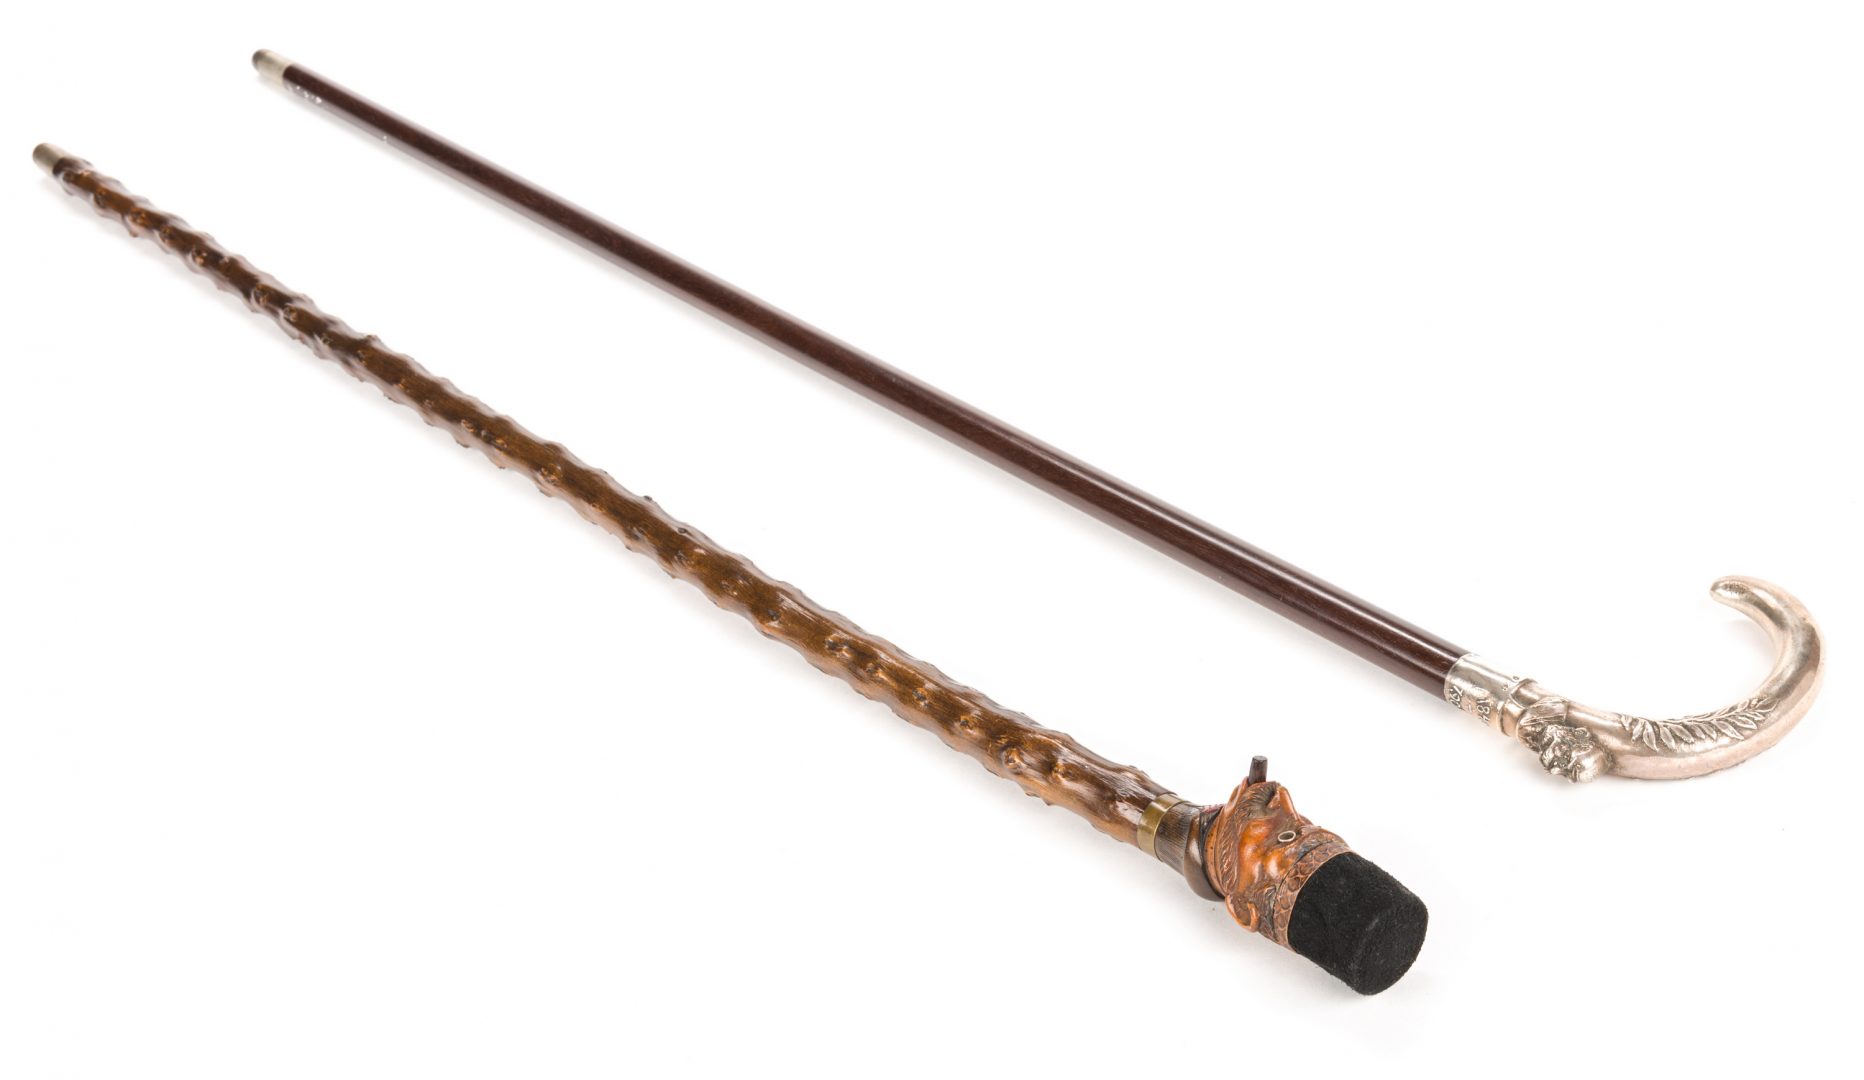 Lot 719: Silver Jubilee Cane and Mechanical Cane, 2 items